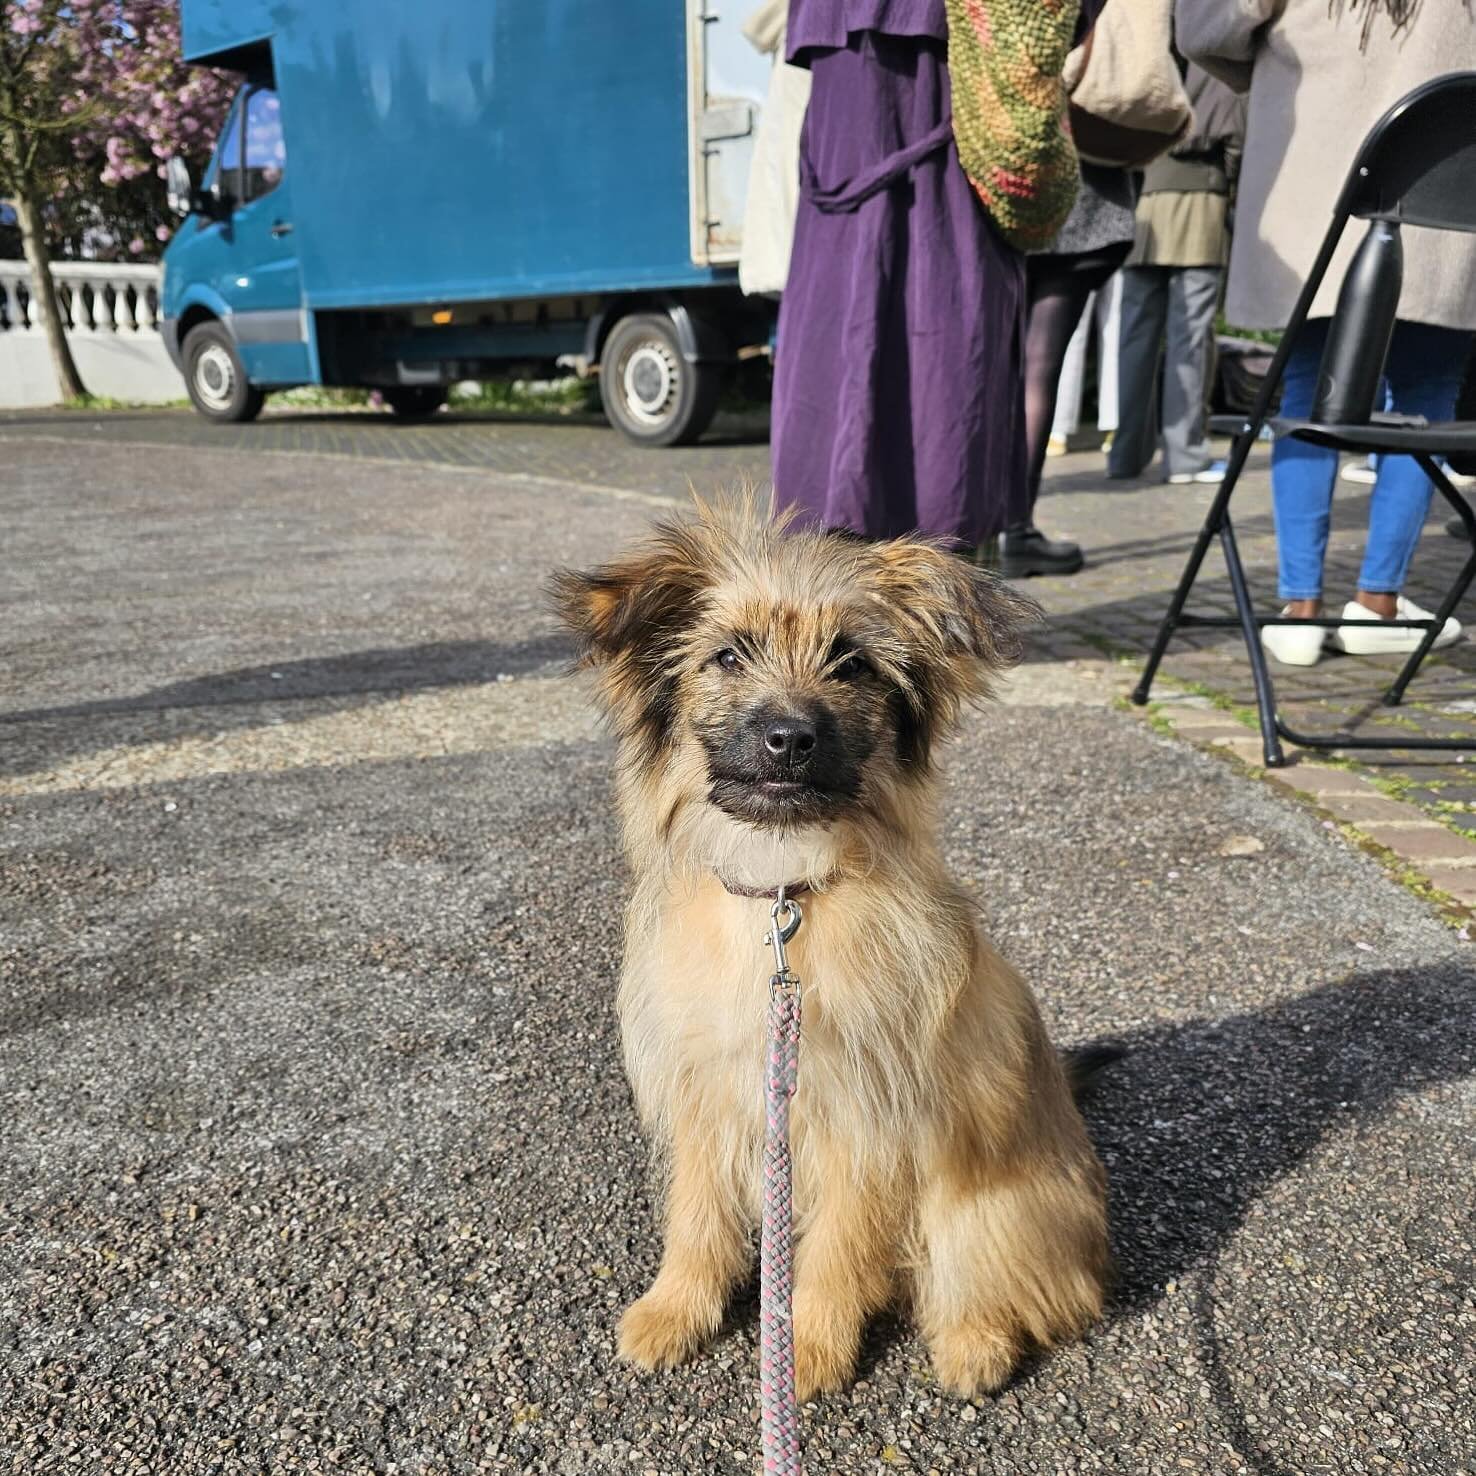 Baby Cheese having her first day on set today in sunny Brighton! She is ridiculously cute. 

#onset #filming #filminglocation #filming🎬 #filmdirector #featurefilm #puppy #cutepuppy #pyrshep #pyreneanshepherd #production #producer #filmlife #artdepar